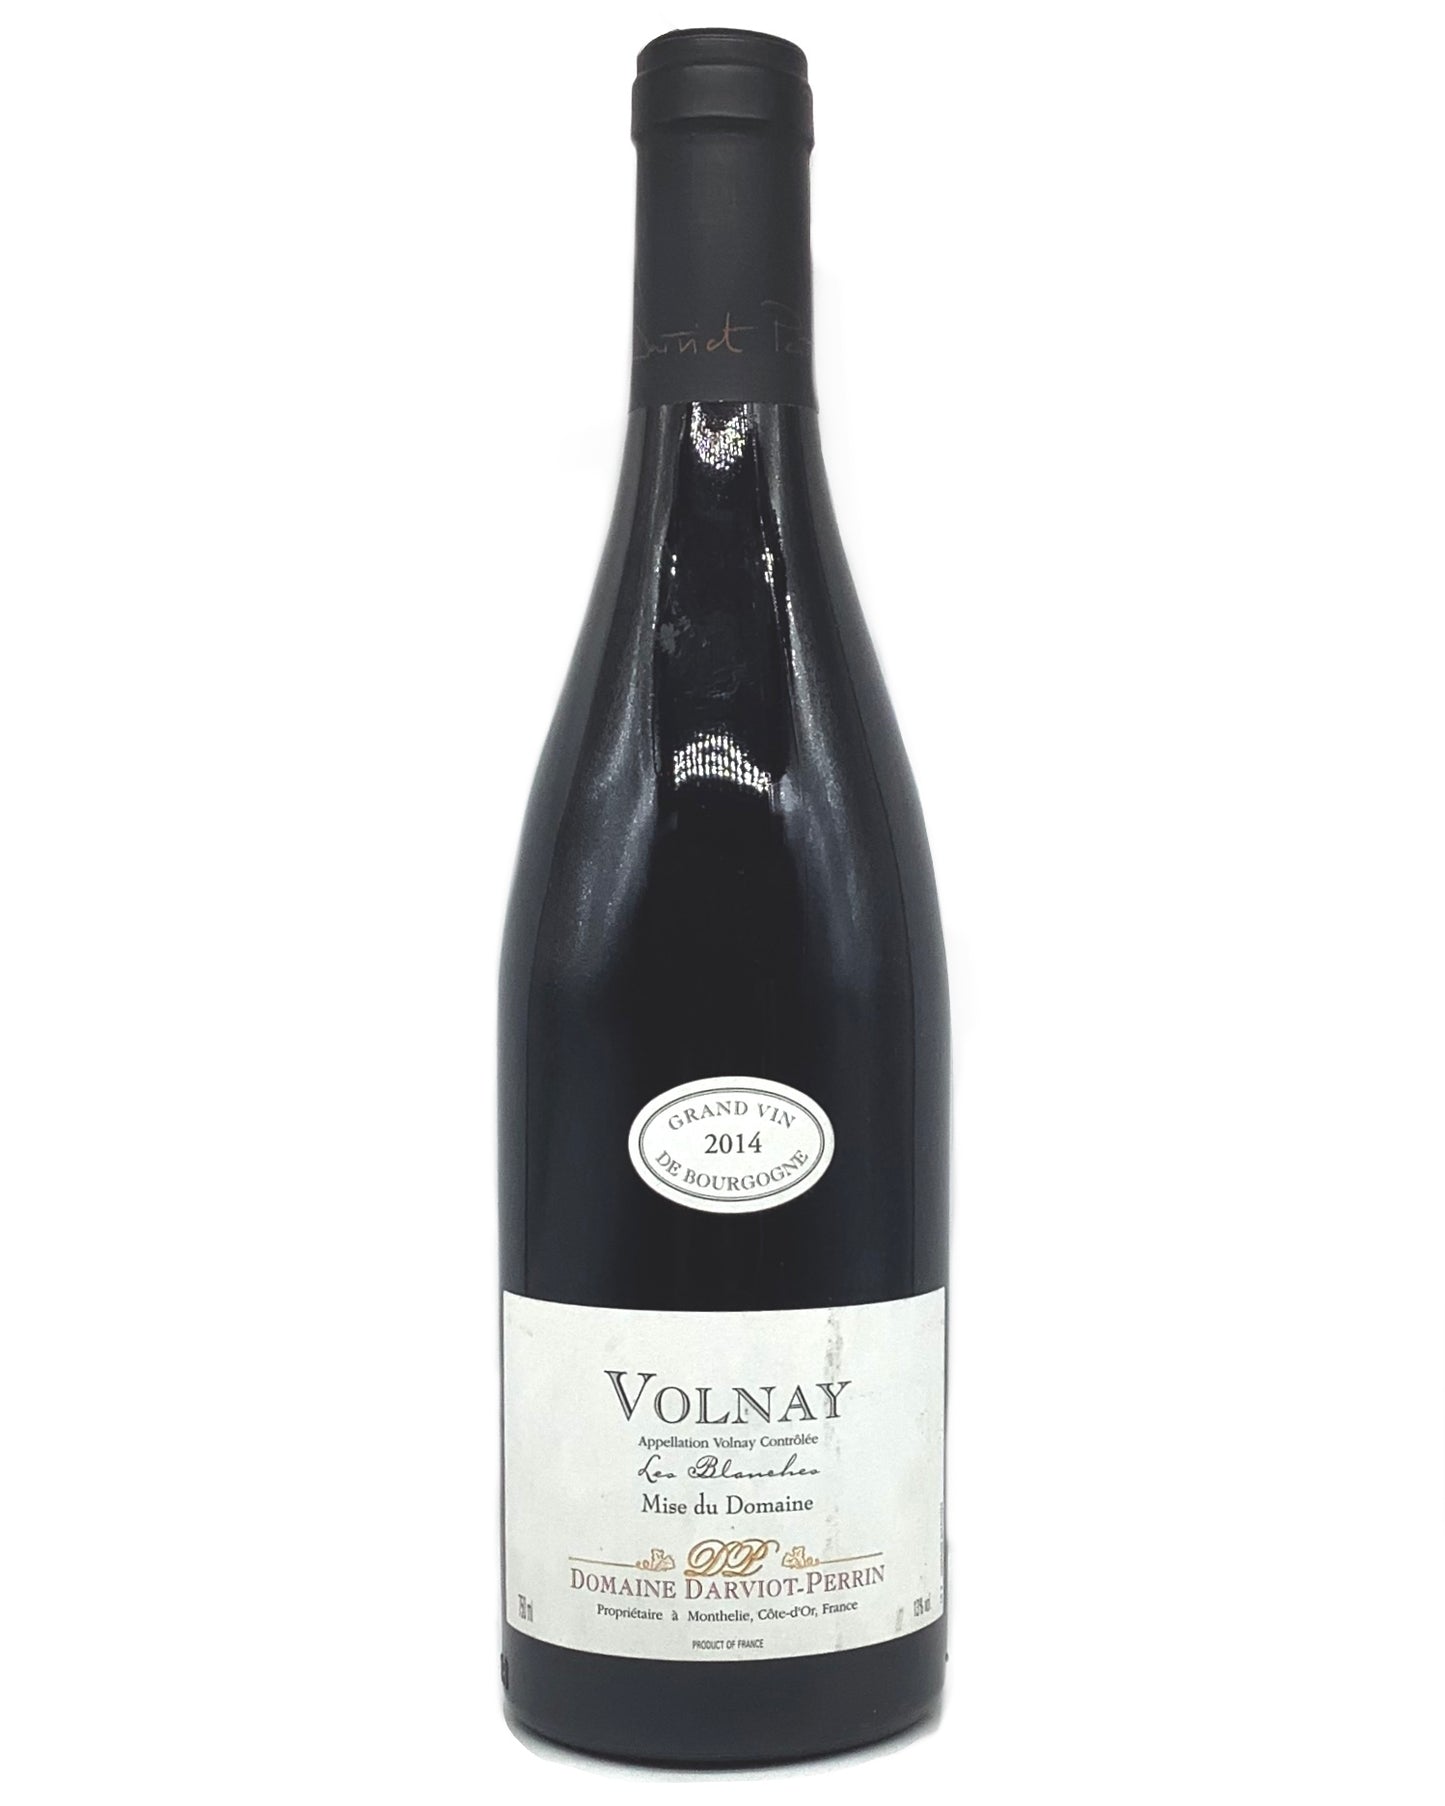 Domaine Darviot-Perrin, Pinot Noir, Volnay "Les Blanches" Côte de Beaune, Burgundy, France 2014